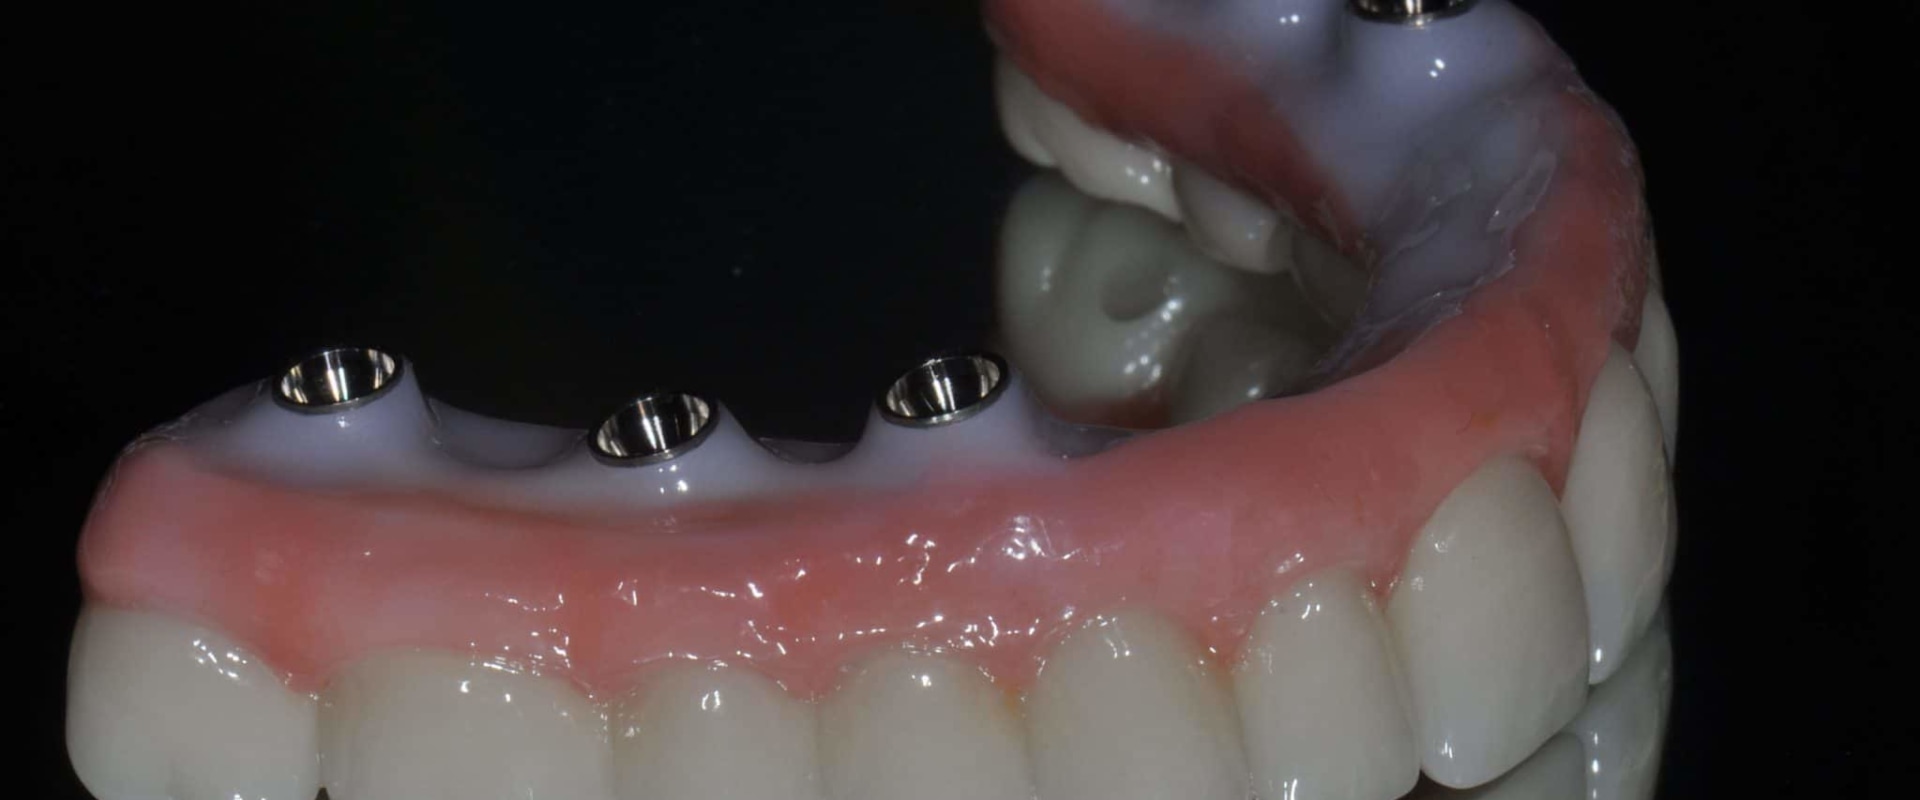 What are the best teeth implants made of?